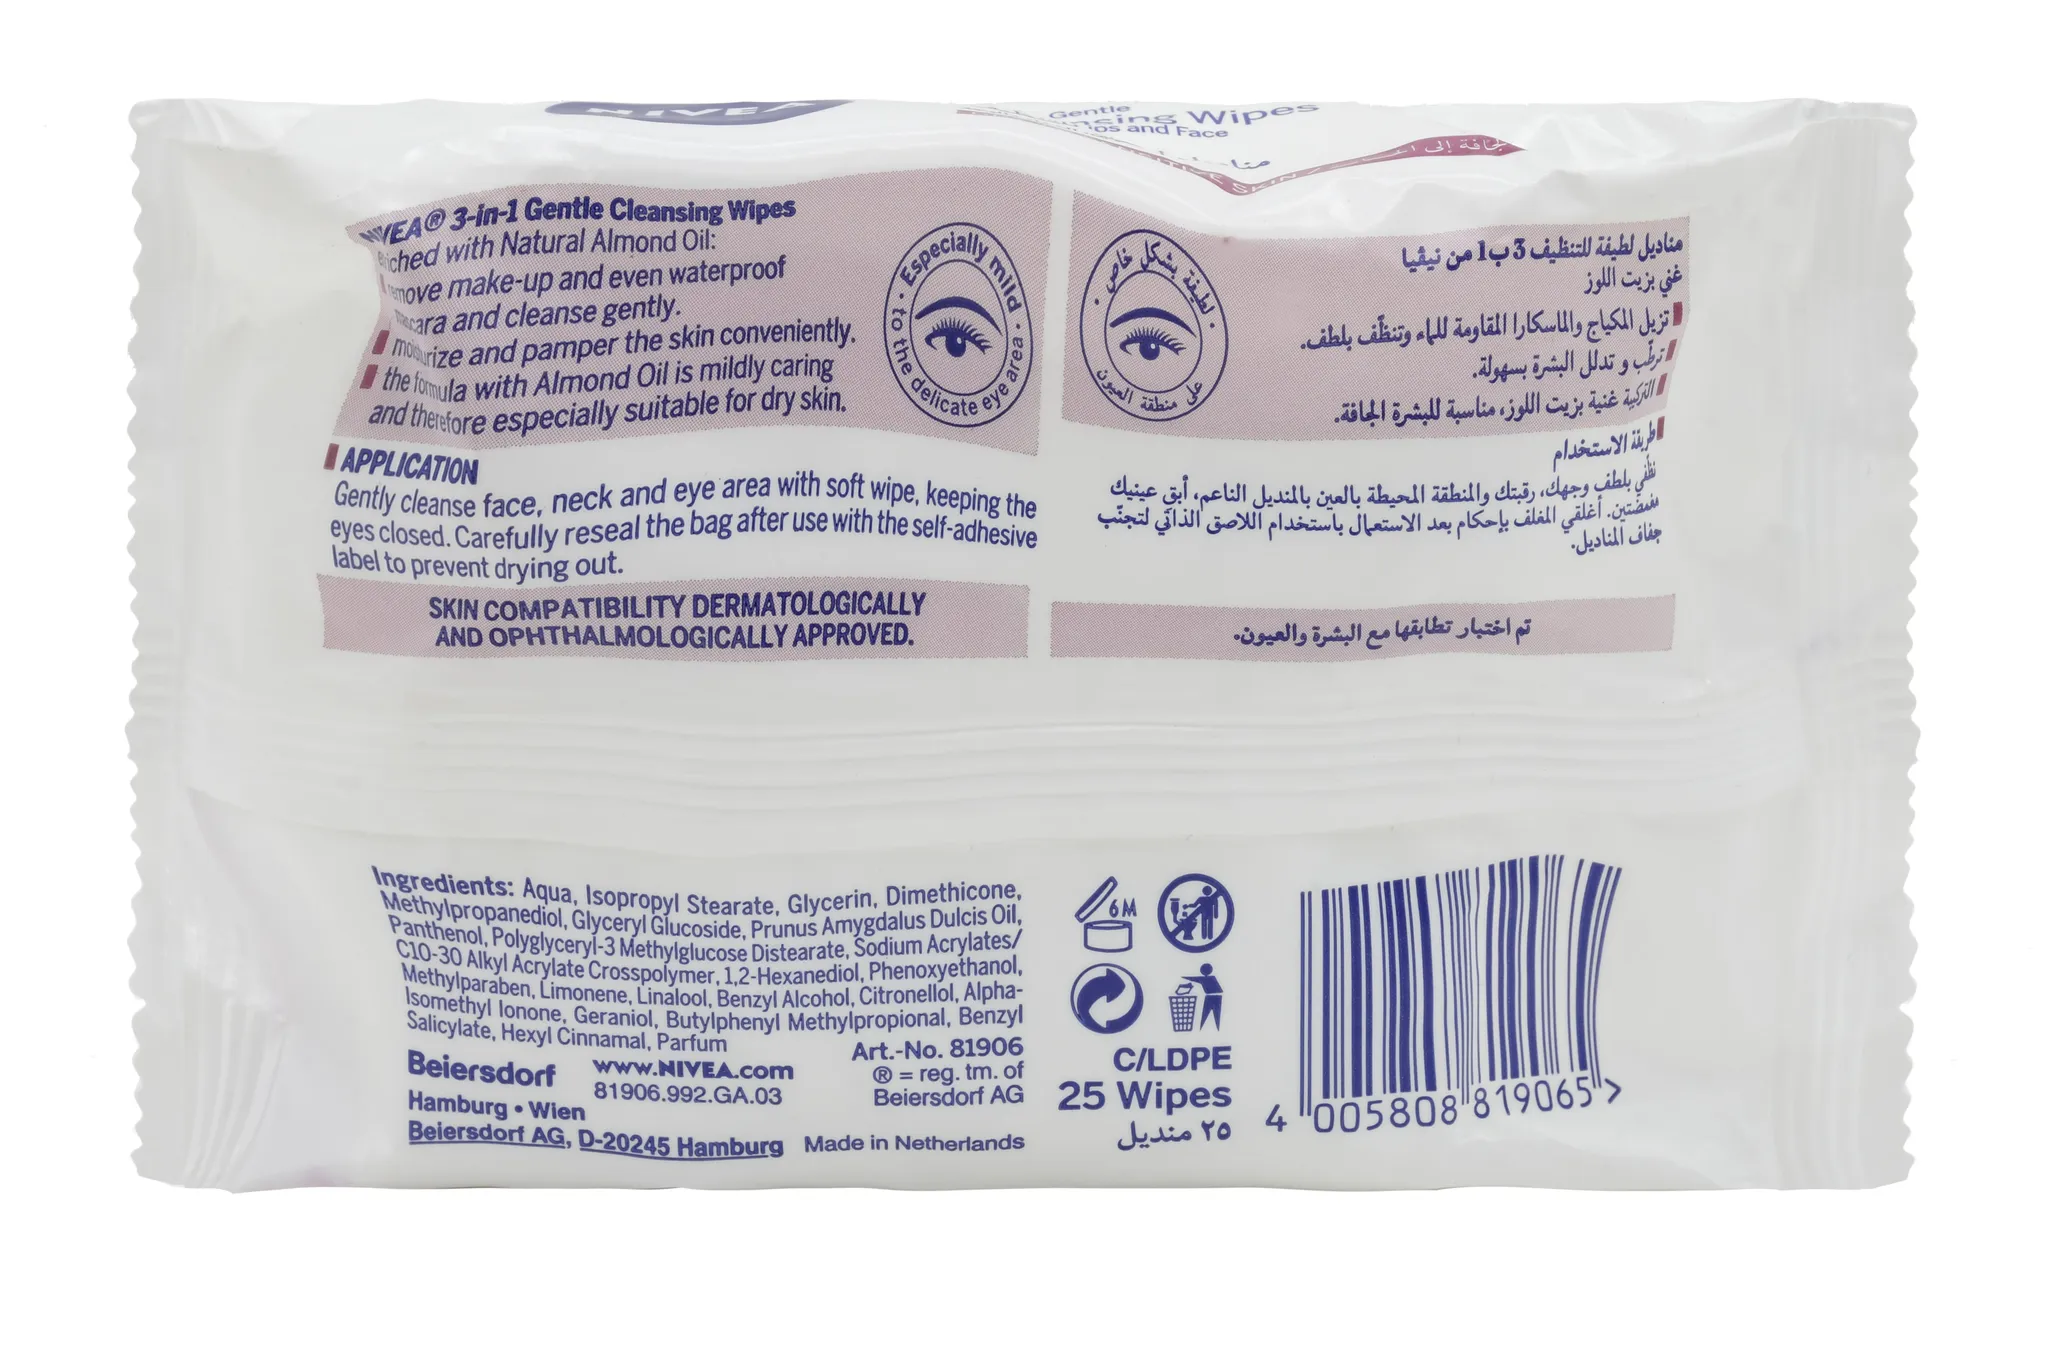 3 in 1 Gentle Cleansing Wipes- 25pcs